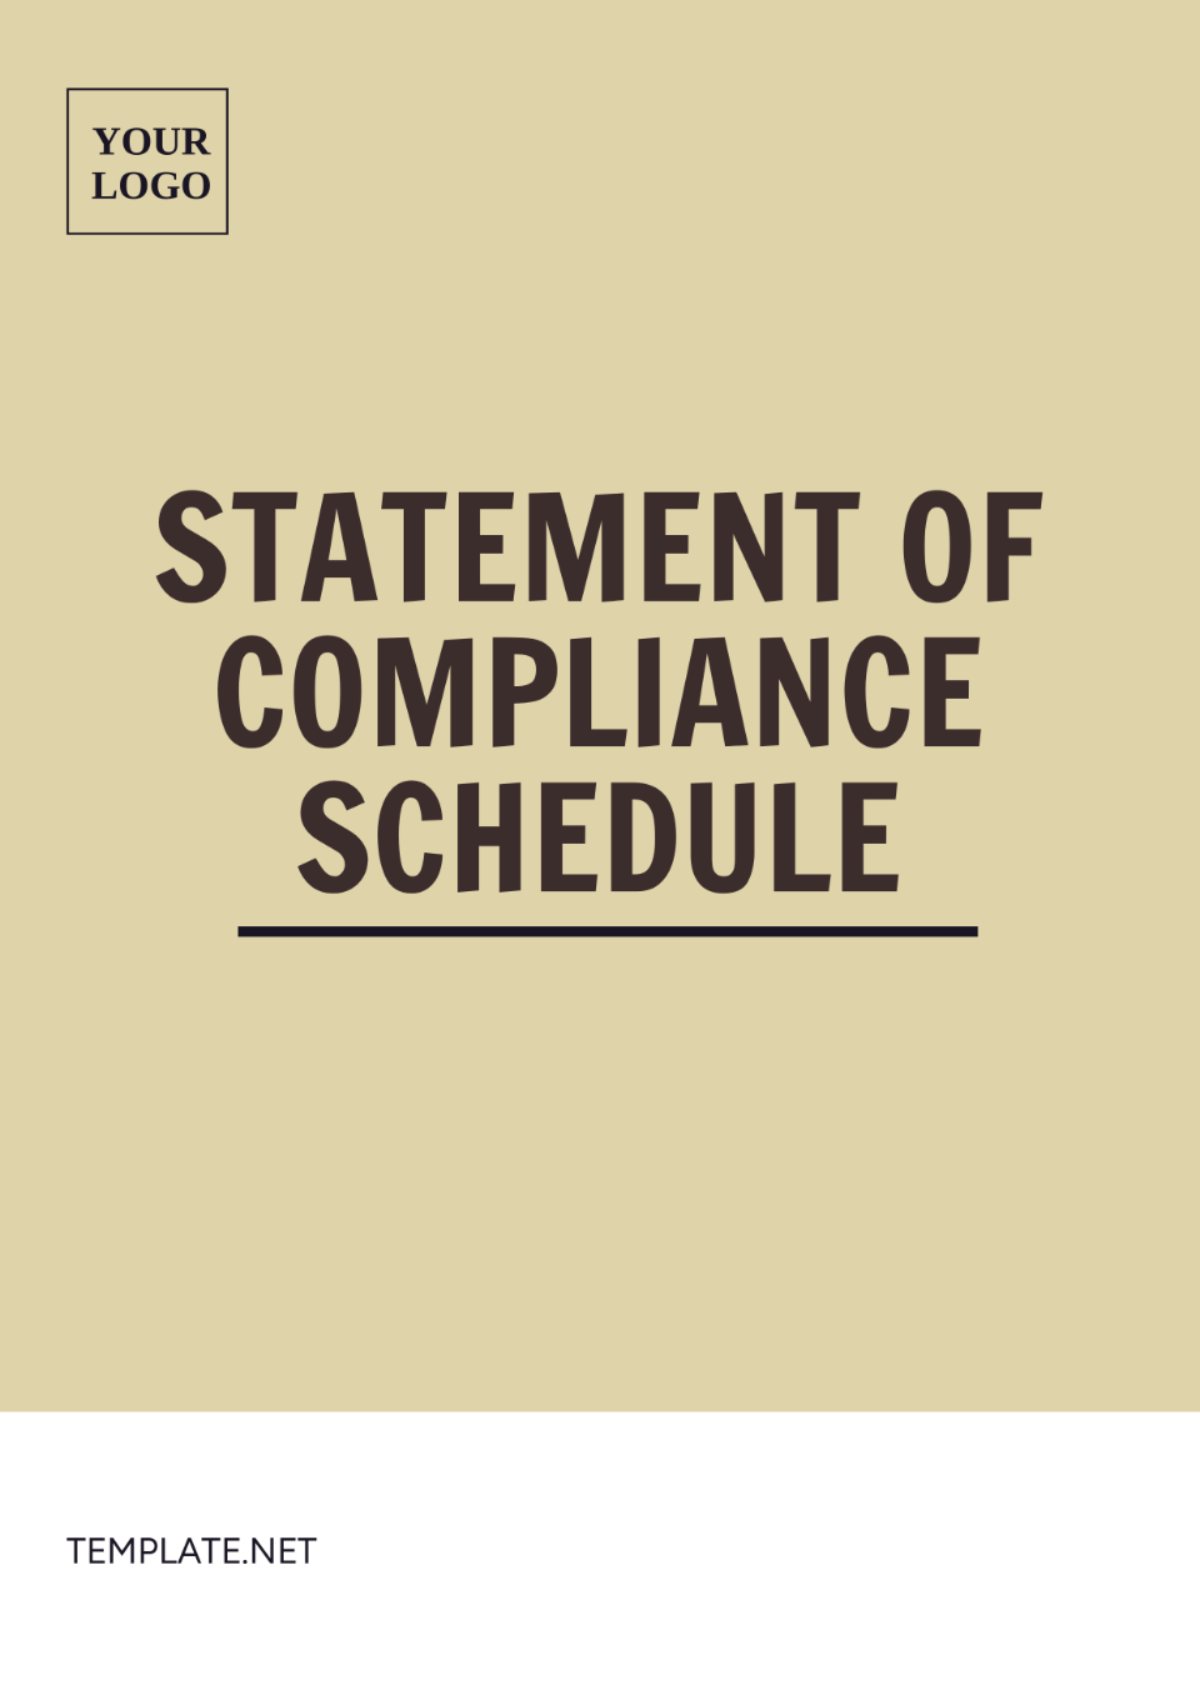 Statement of Compliance Schedule Template